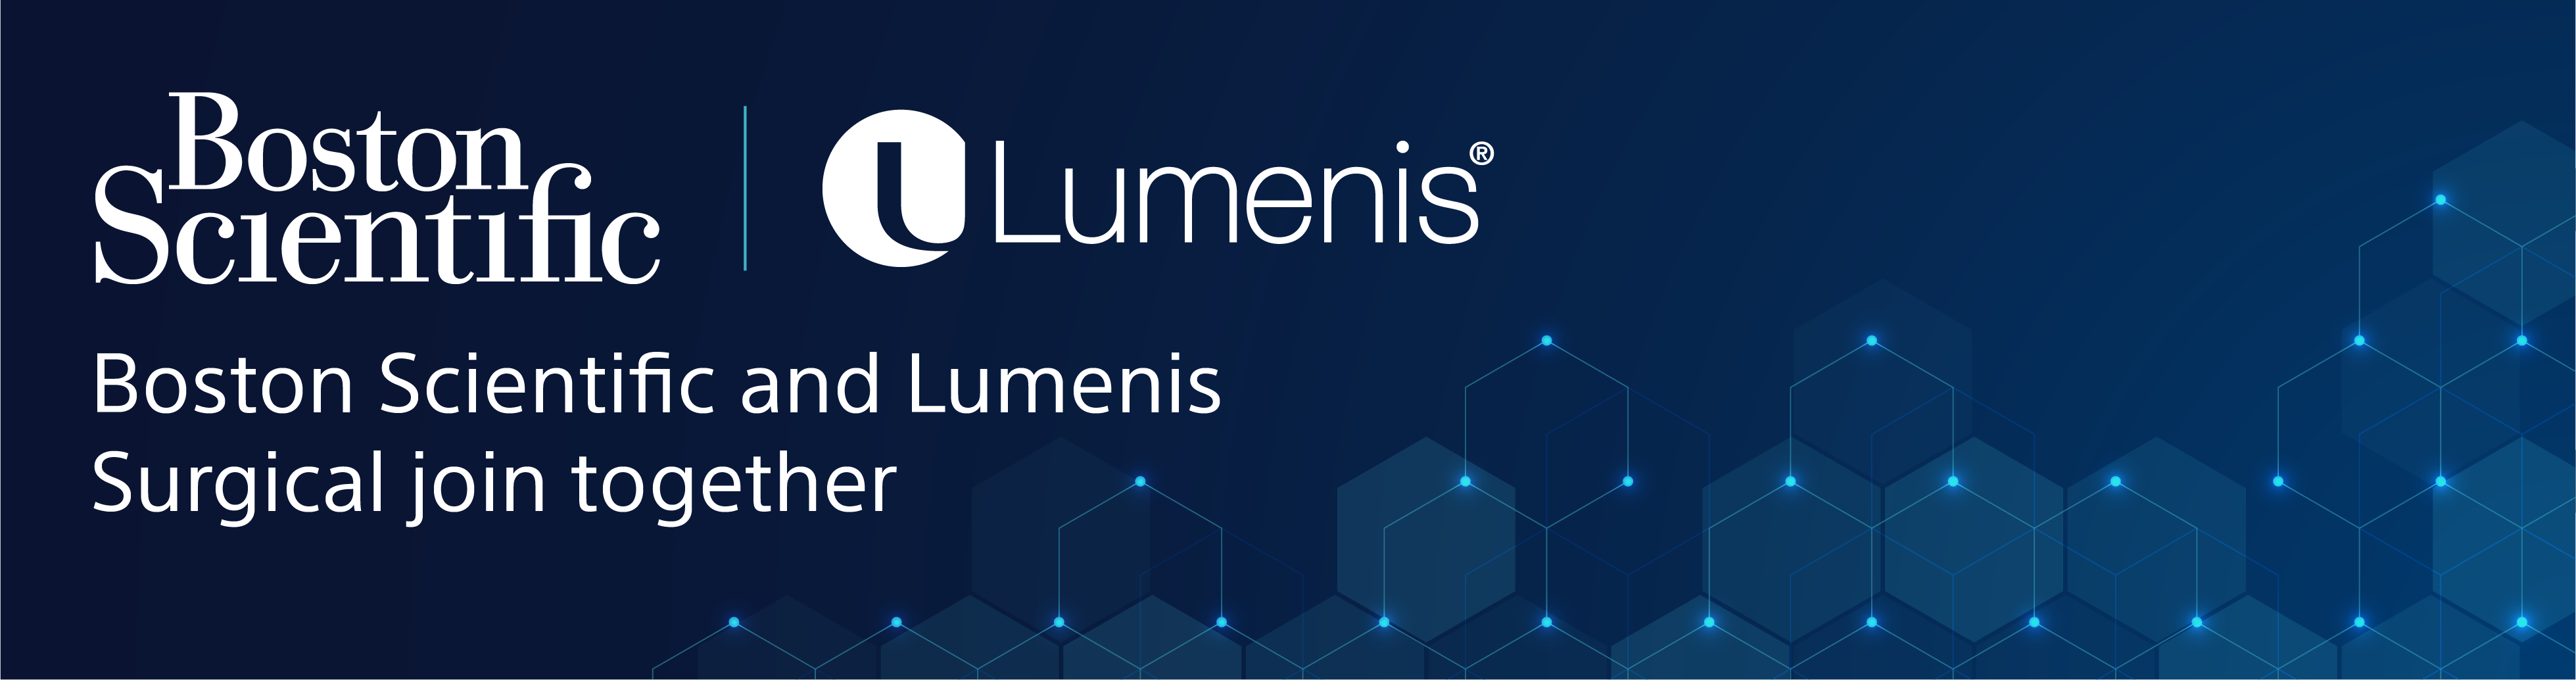 Boston Scientific and Lumines logos side by side horizontally on blue background